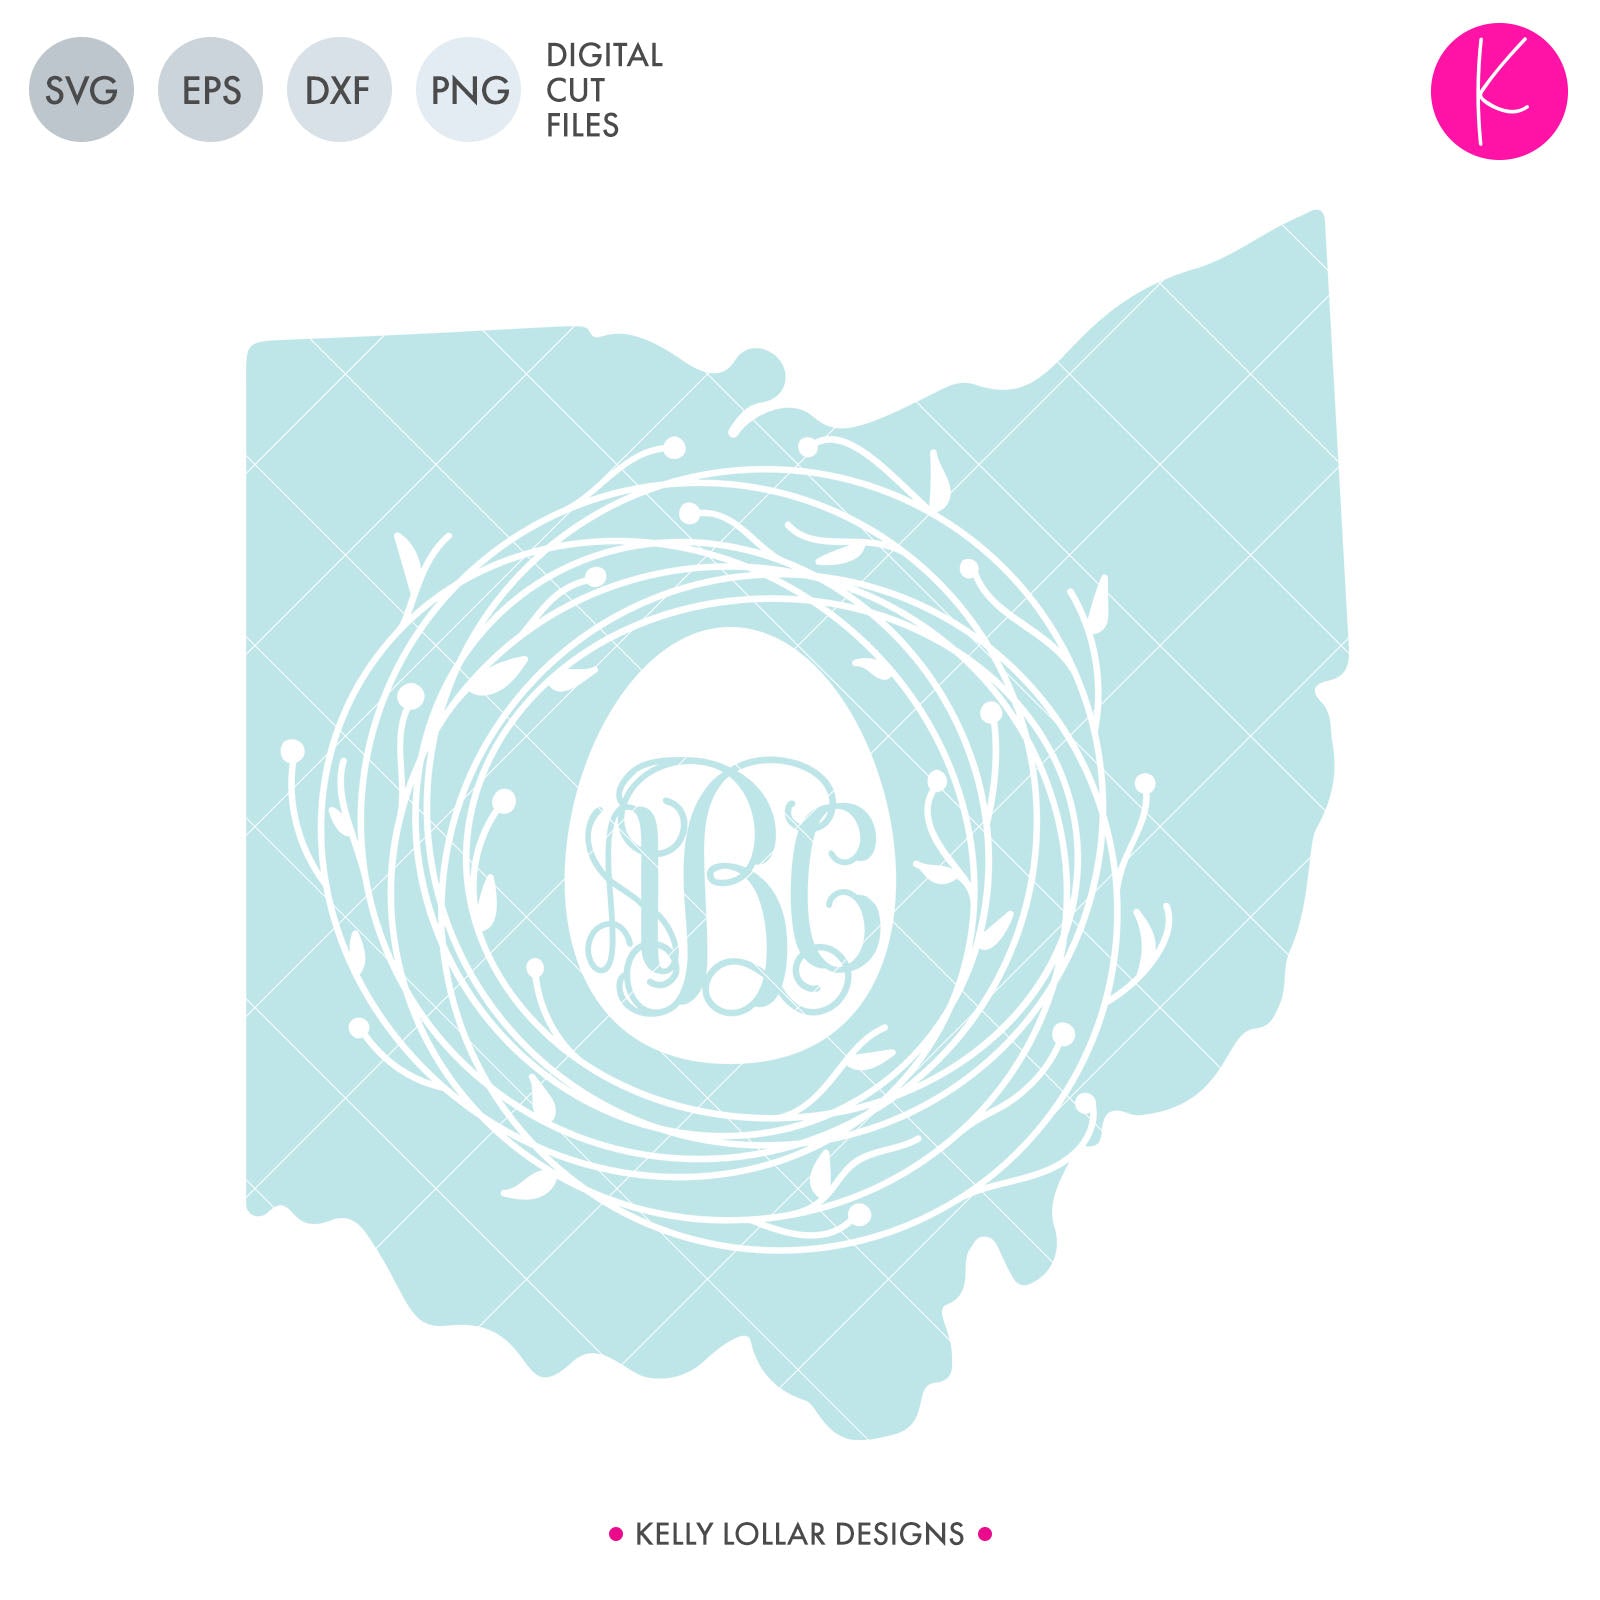 Download Ohio State Bundle | SVG DXF EPS PNG Cut Files - Kelly Lollar Designs